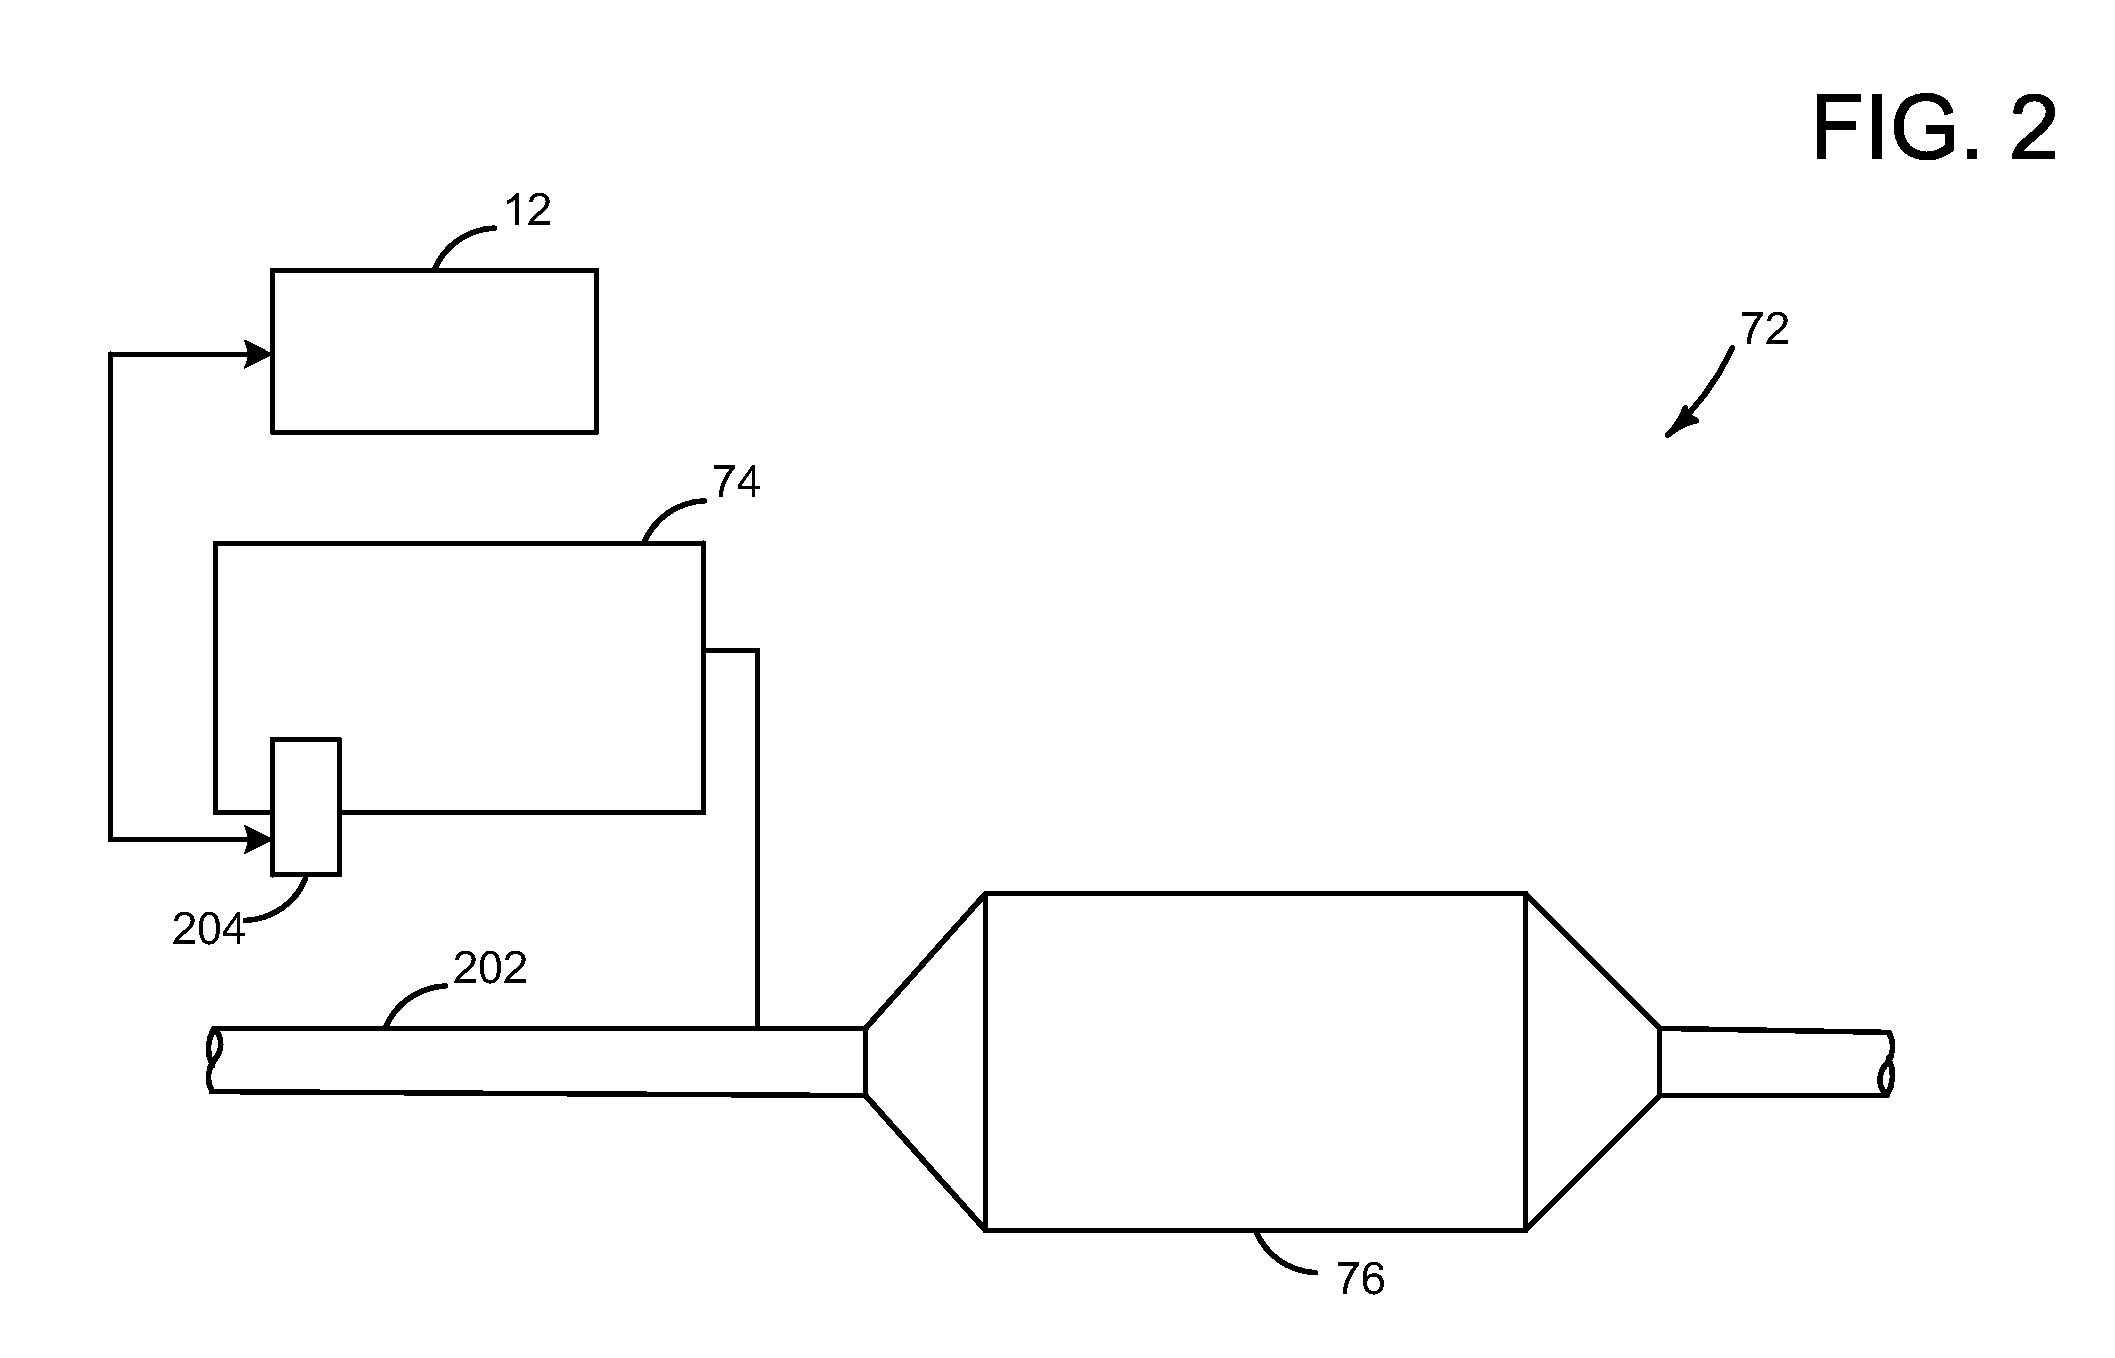 Approach for injecting a reductant